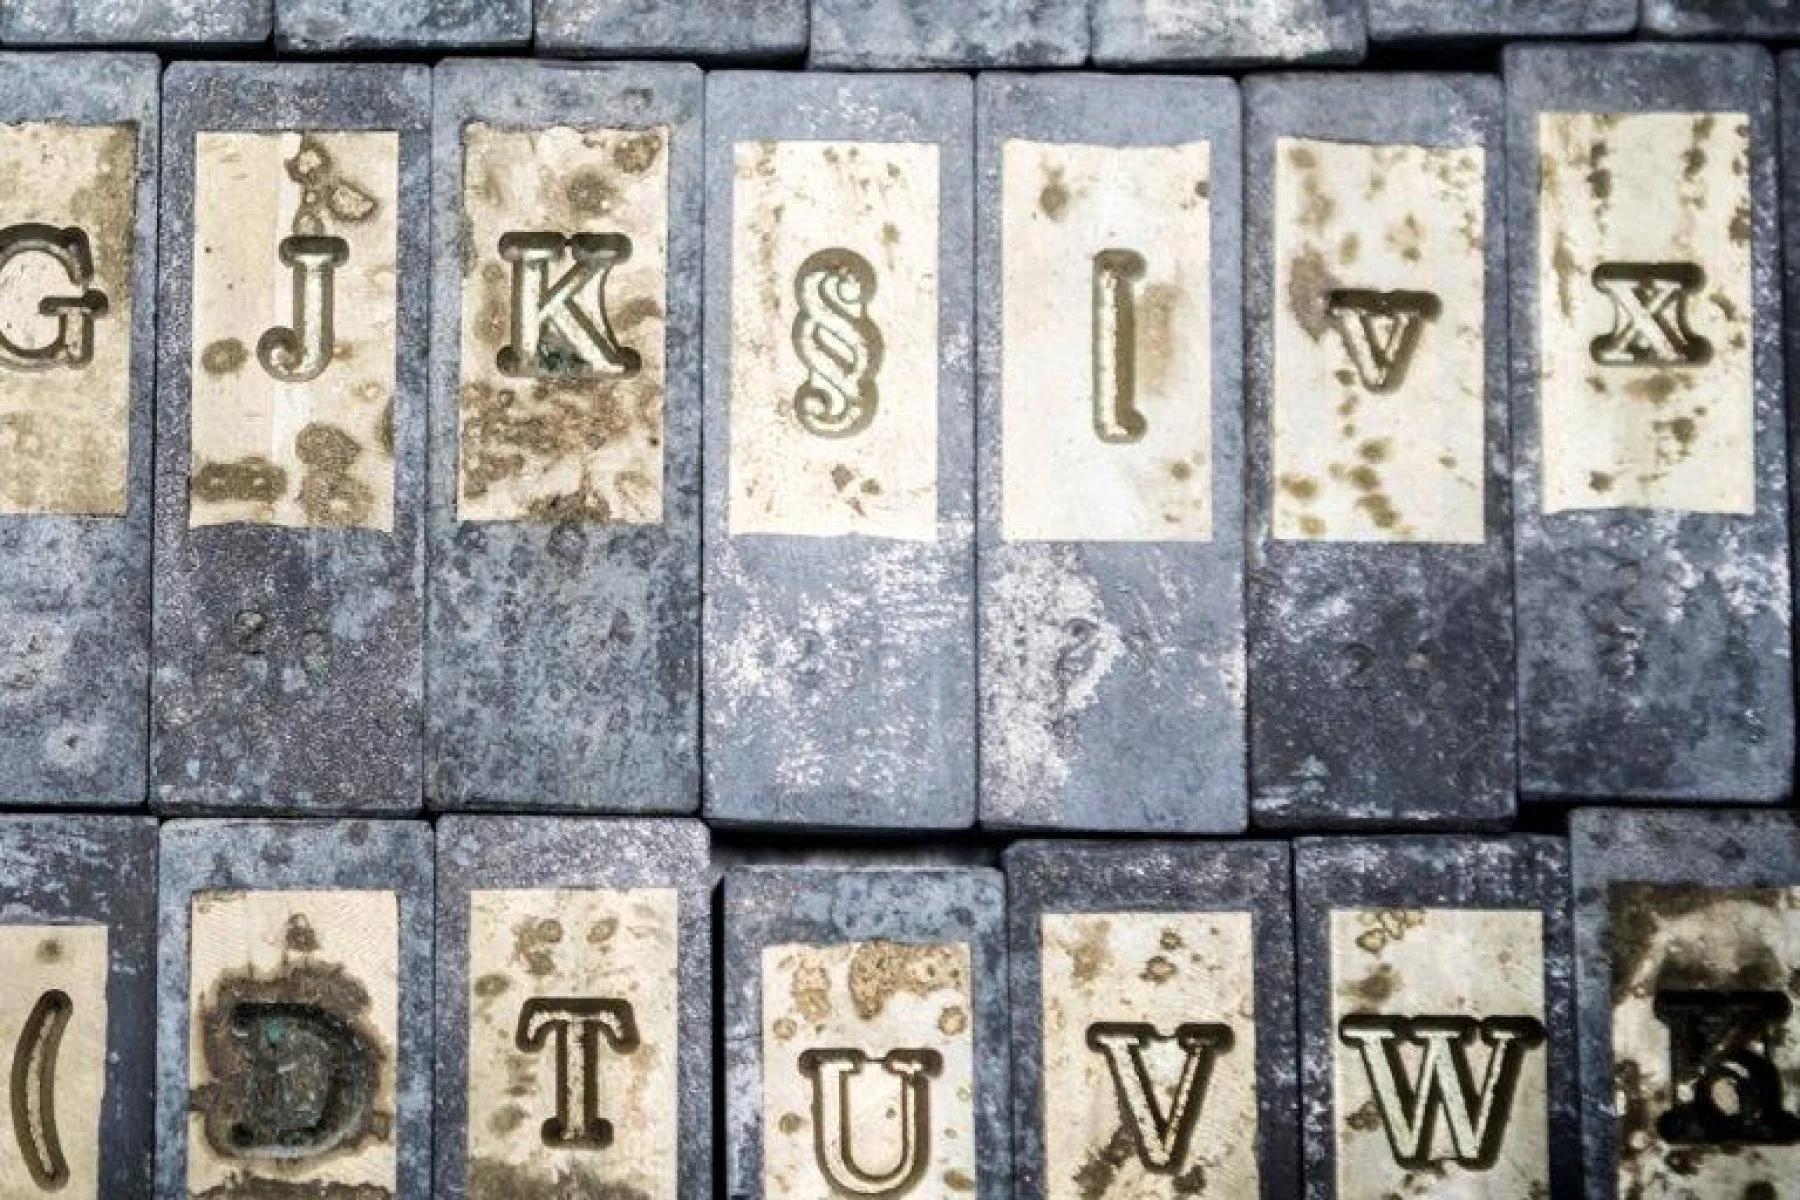 Uppercase, lowercase and punctuation marks on golden matrices on gray bricks